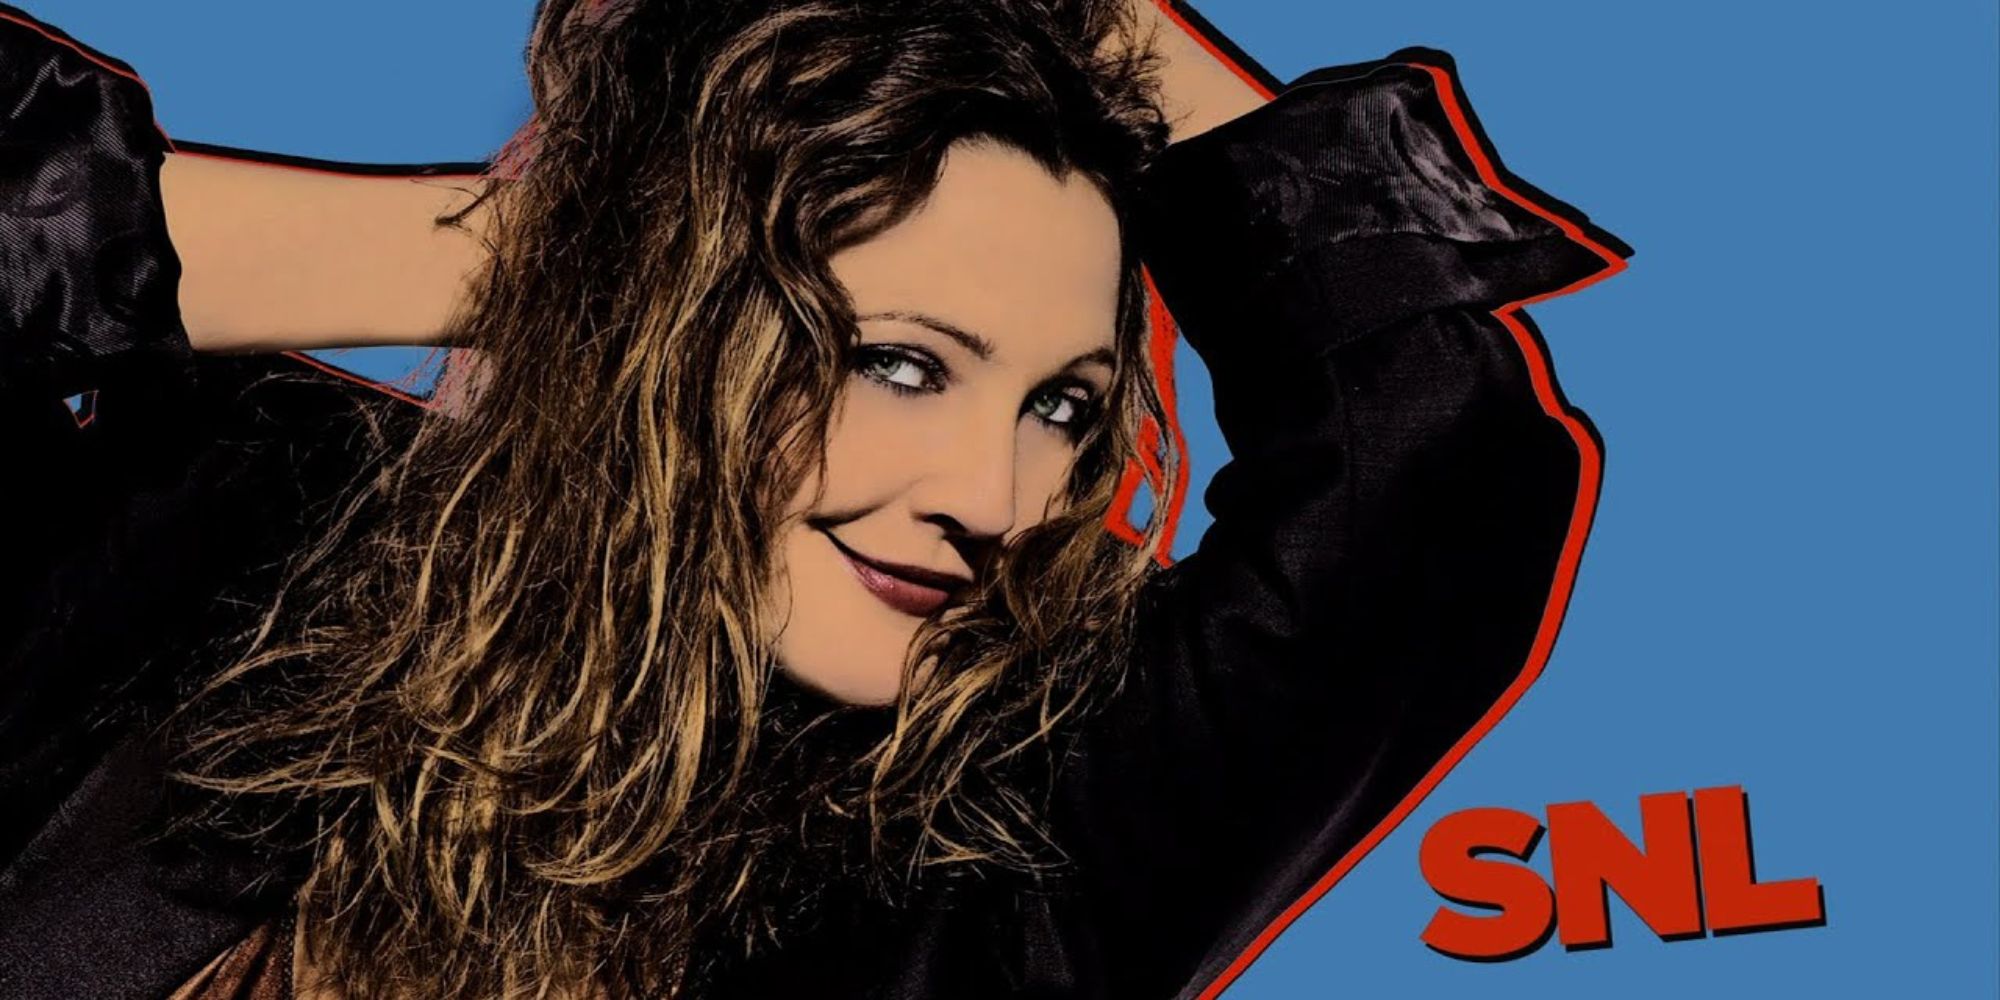 Drew Barrymore in a title card for SNL in 2007